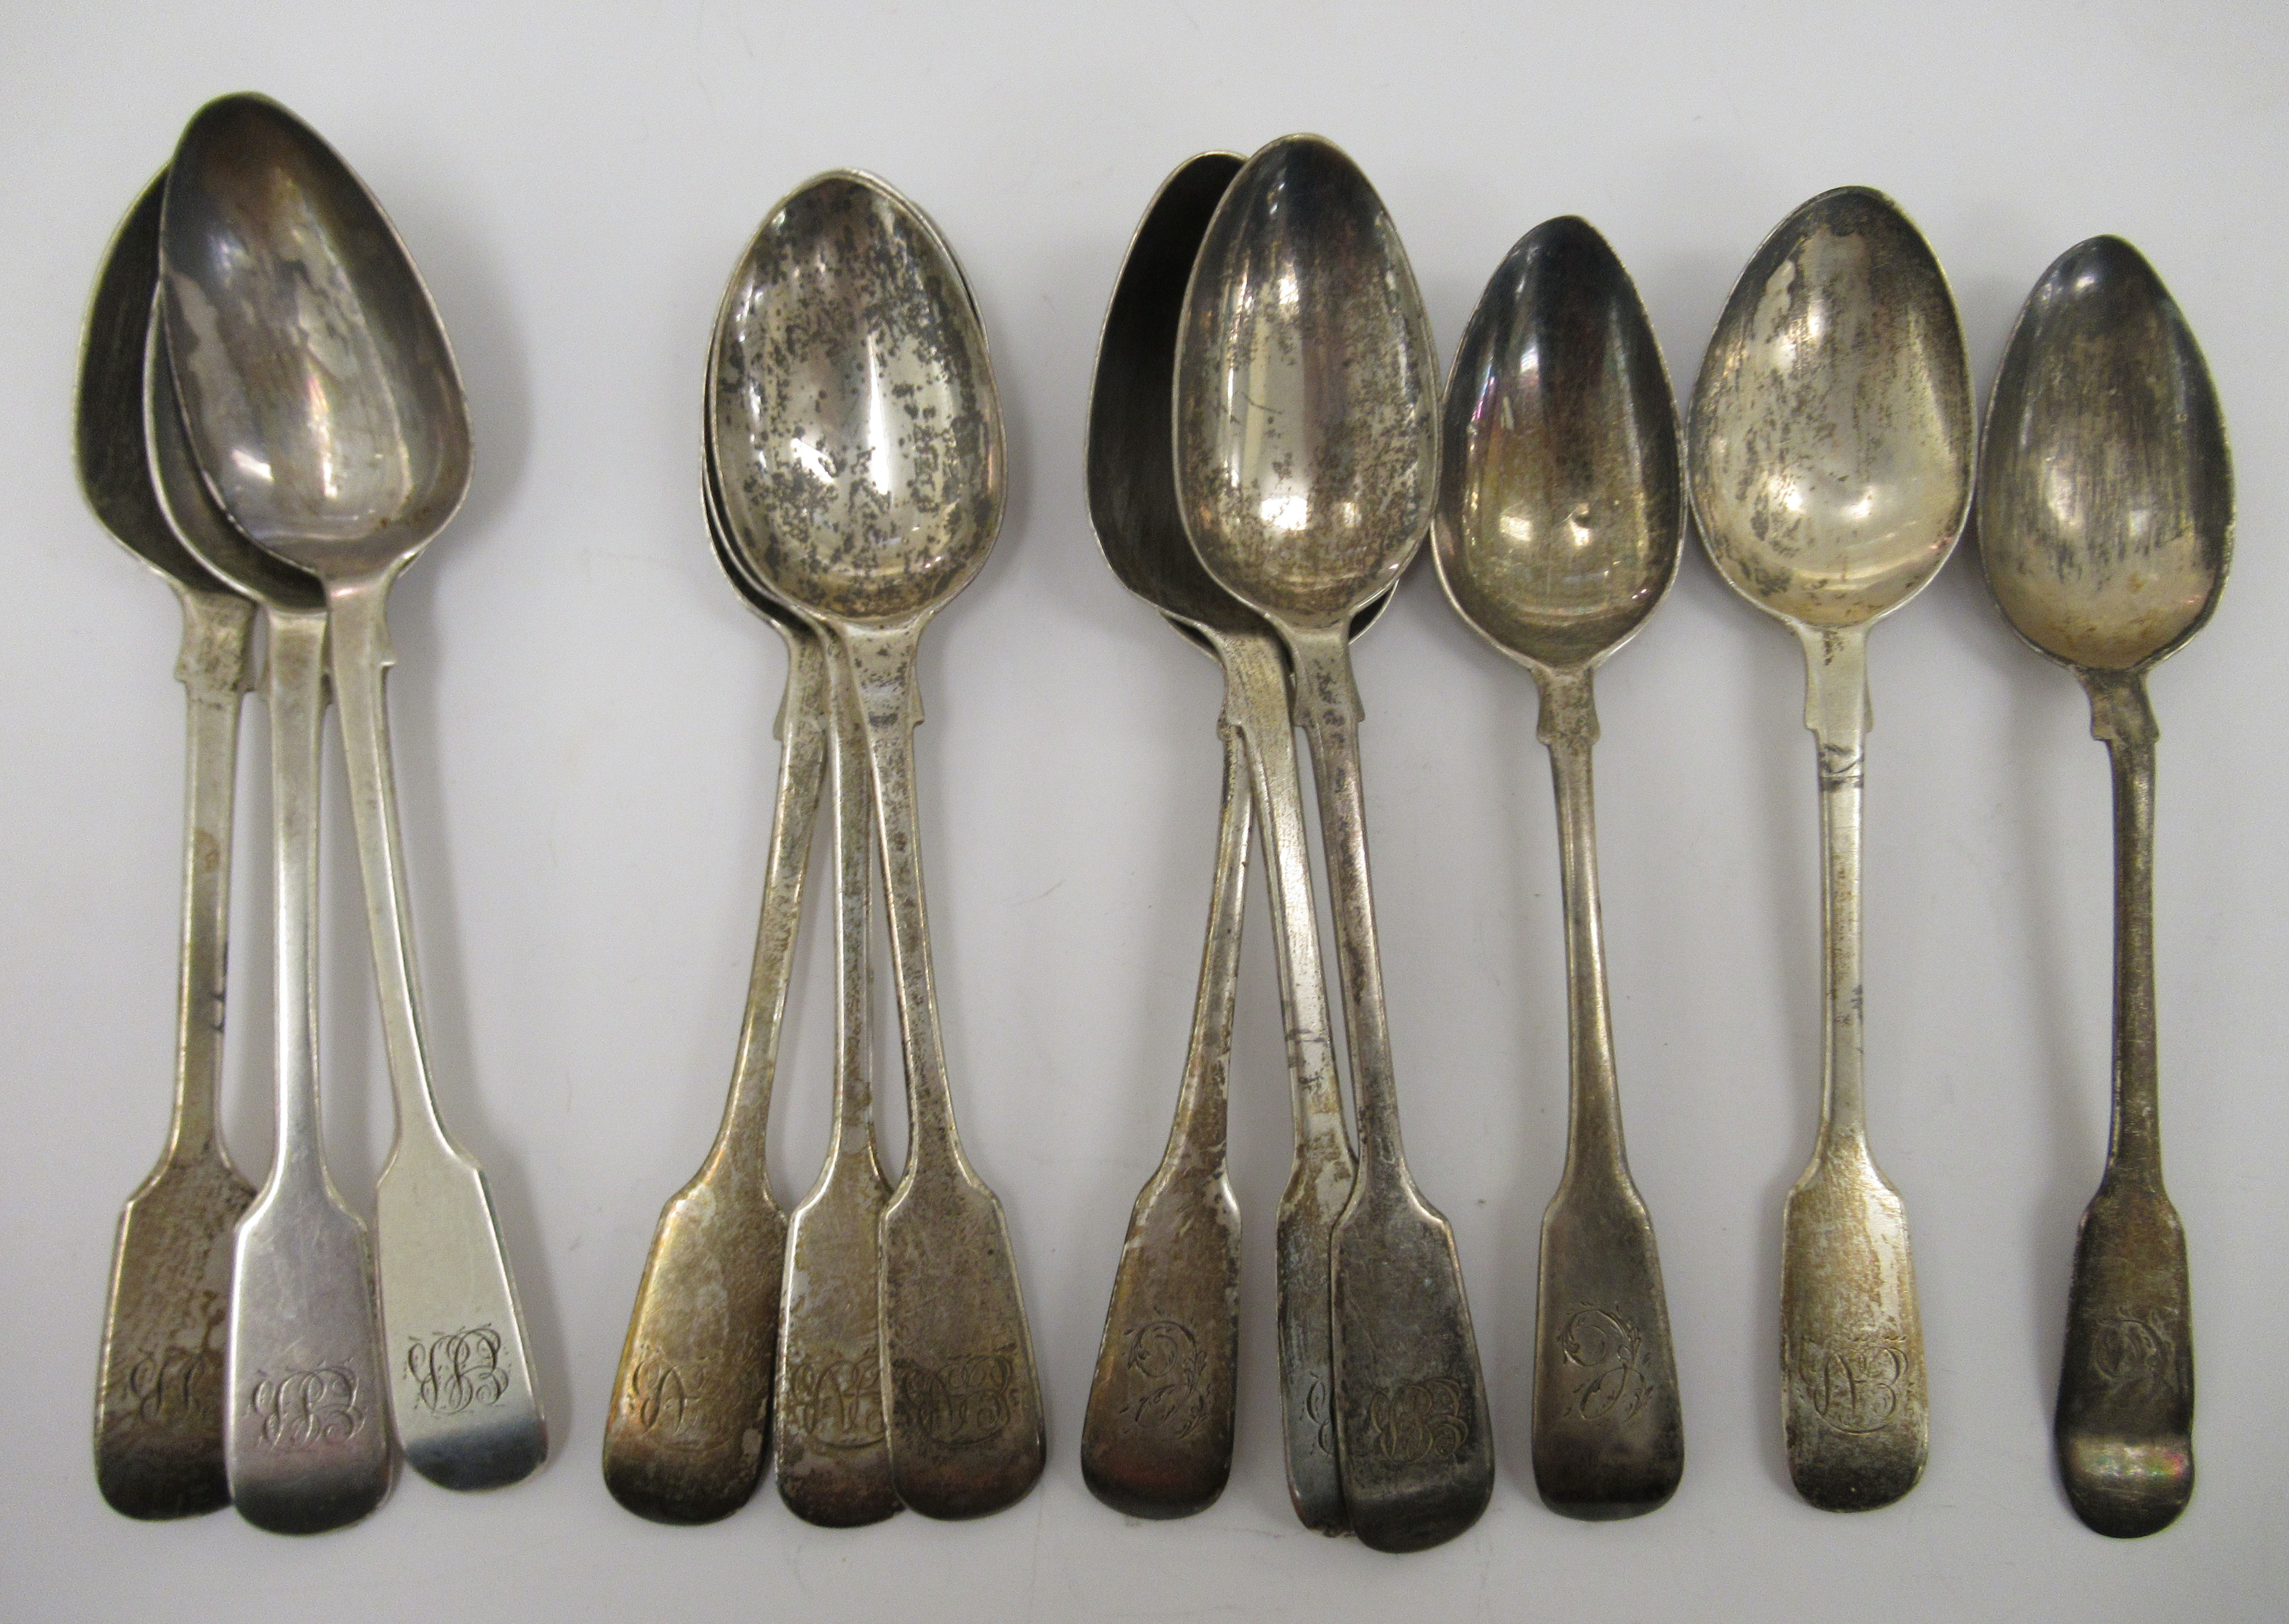 Silver fiddle pattern teaspoons mixed marks 11